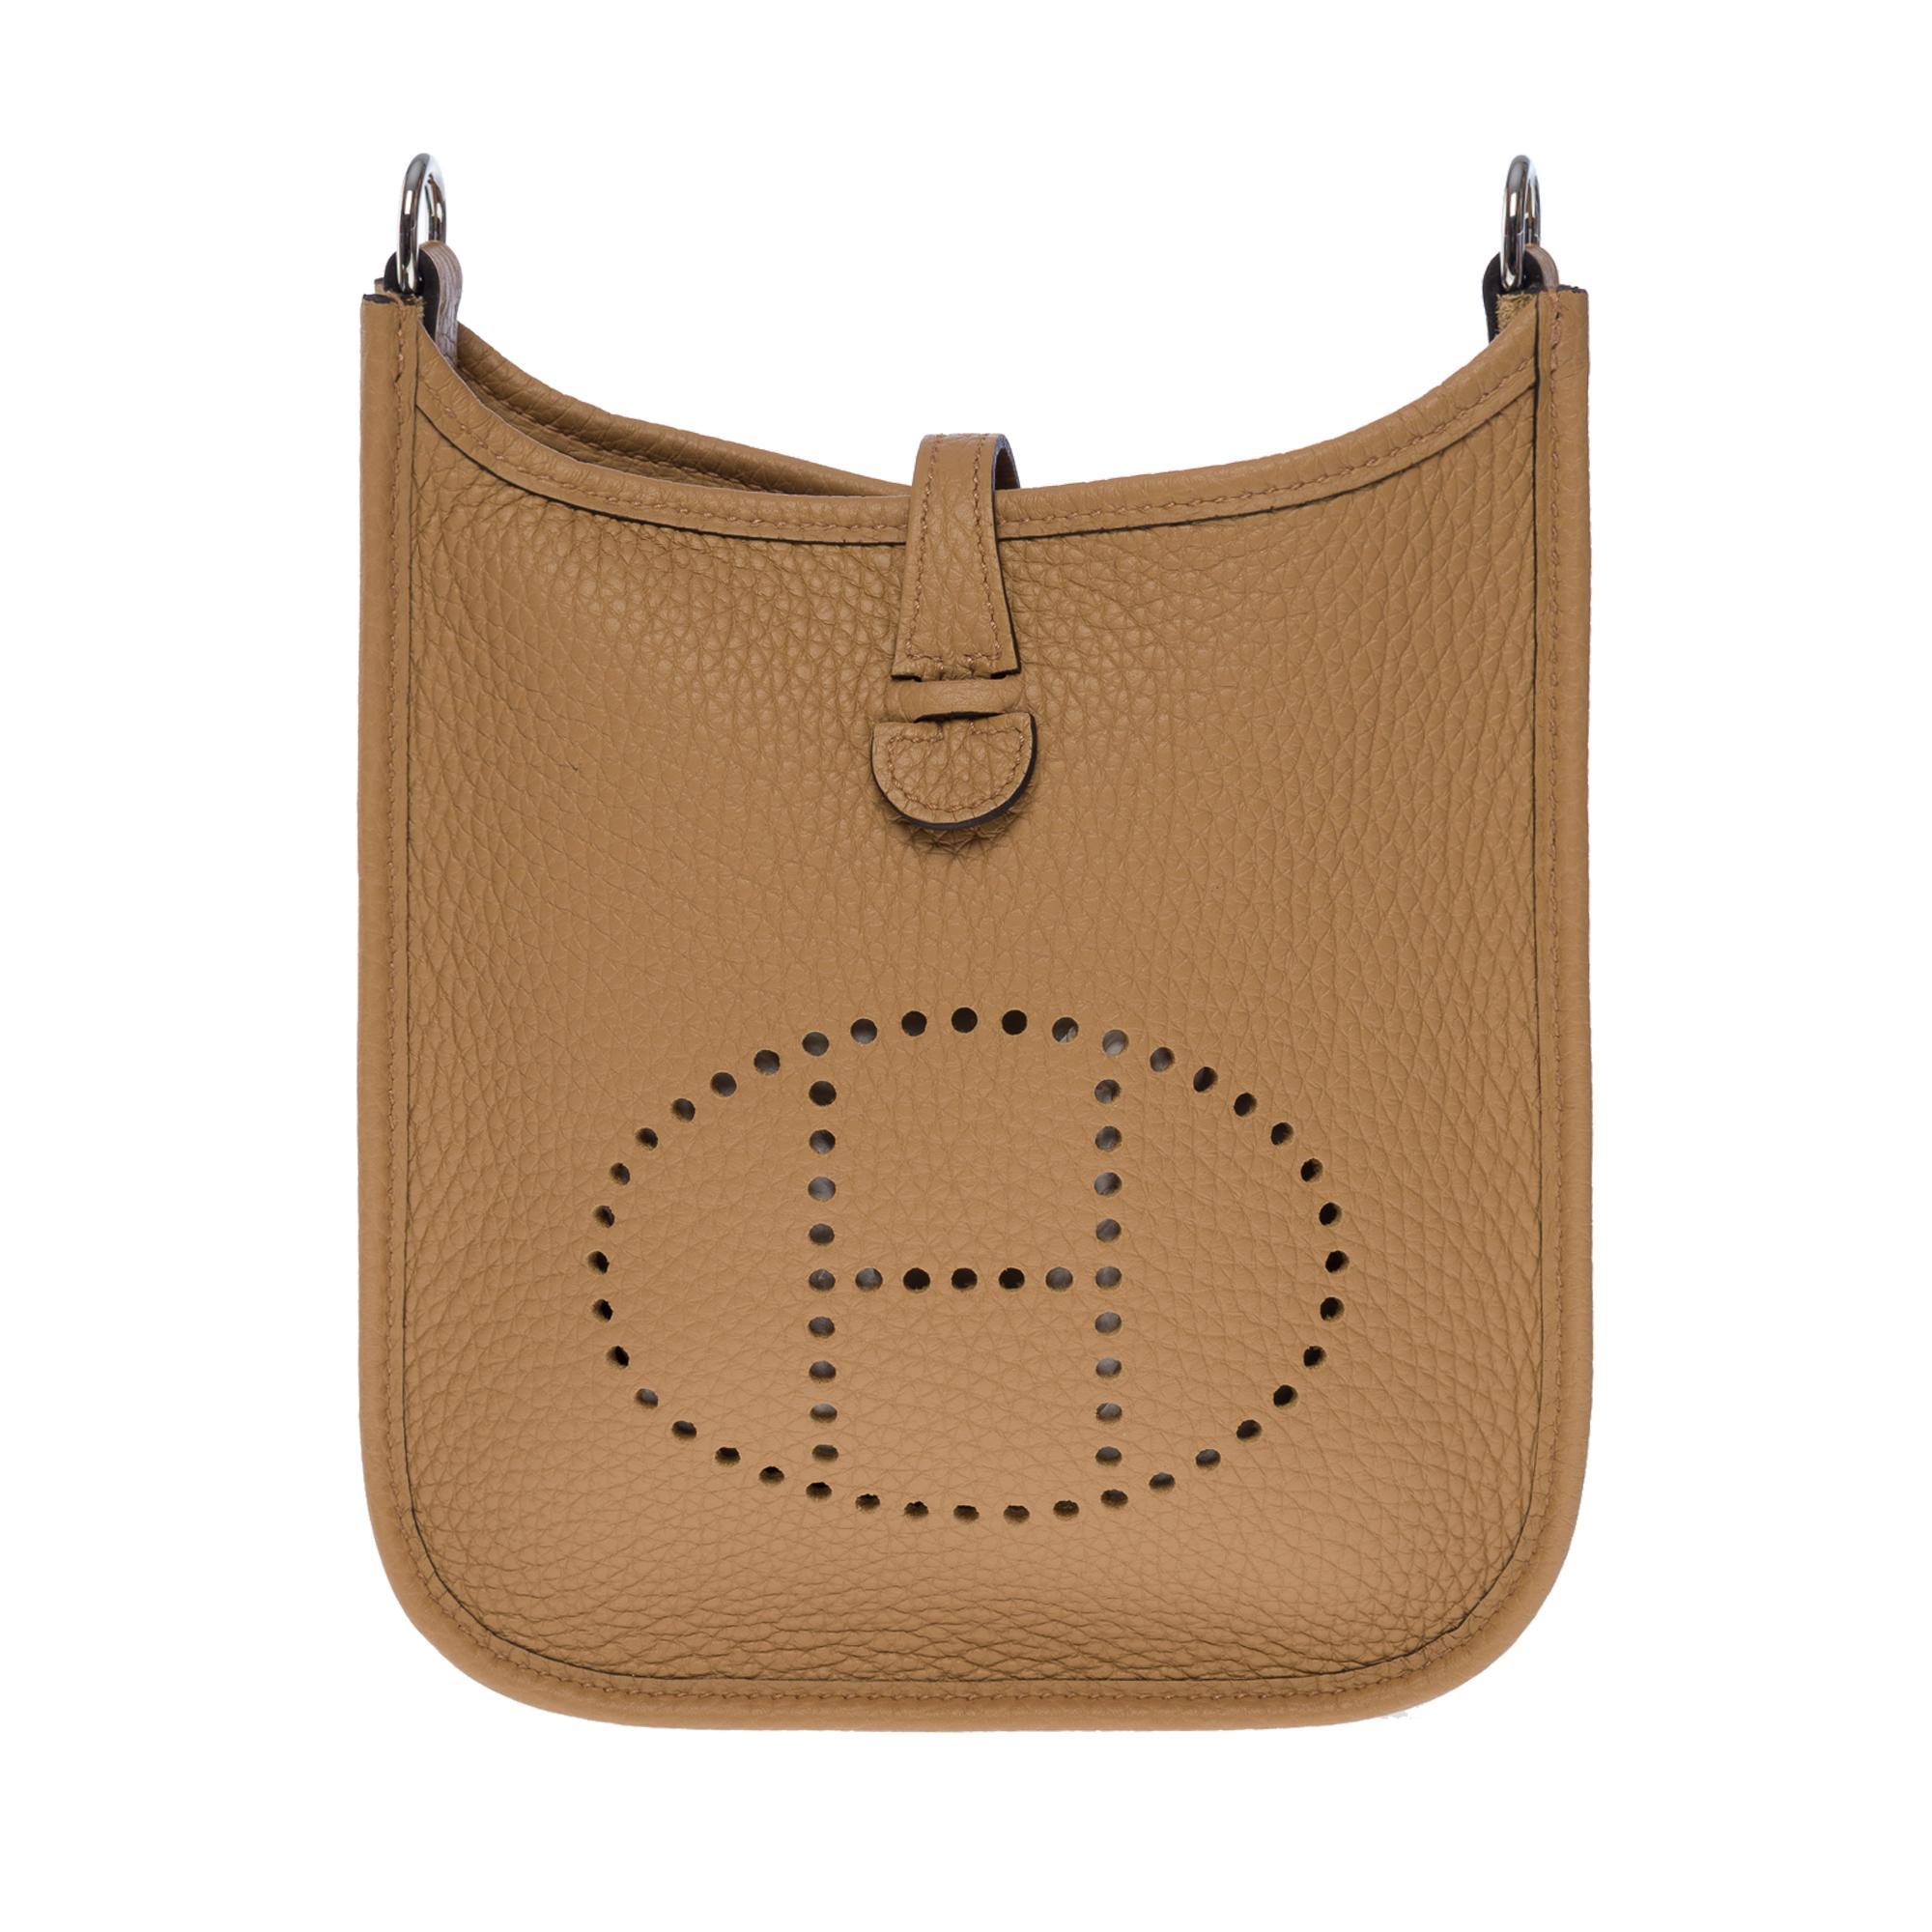 Gorgeous Hermes Evelyne 16 TPM Amazon in Chai leather Taurillon Clémence leather, palladium silver metal hardware, a removable shoulder strap in beige, blue and burgundy fabric allowing a shoulder or shoulder strap

Snap closure on flap
Beige suede